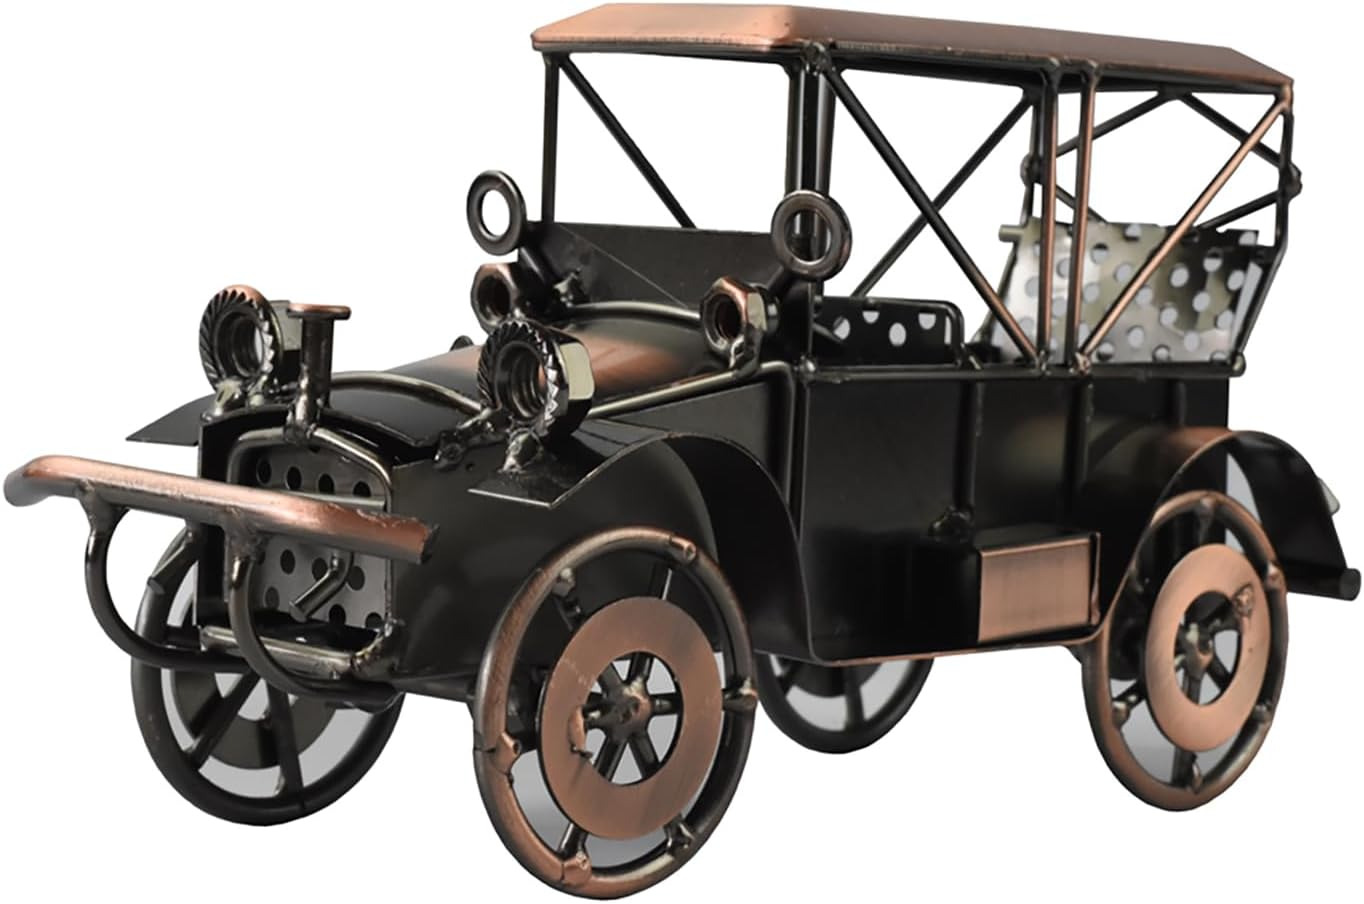 Metal Antique Vintage Car Model Home Décor Handmade Handcrafted Collections Coll